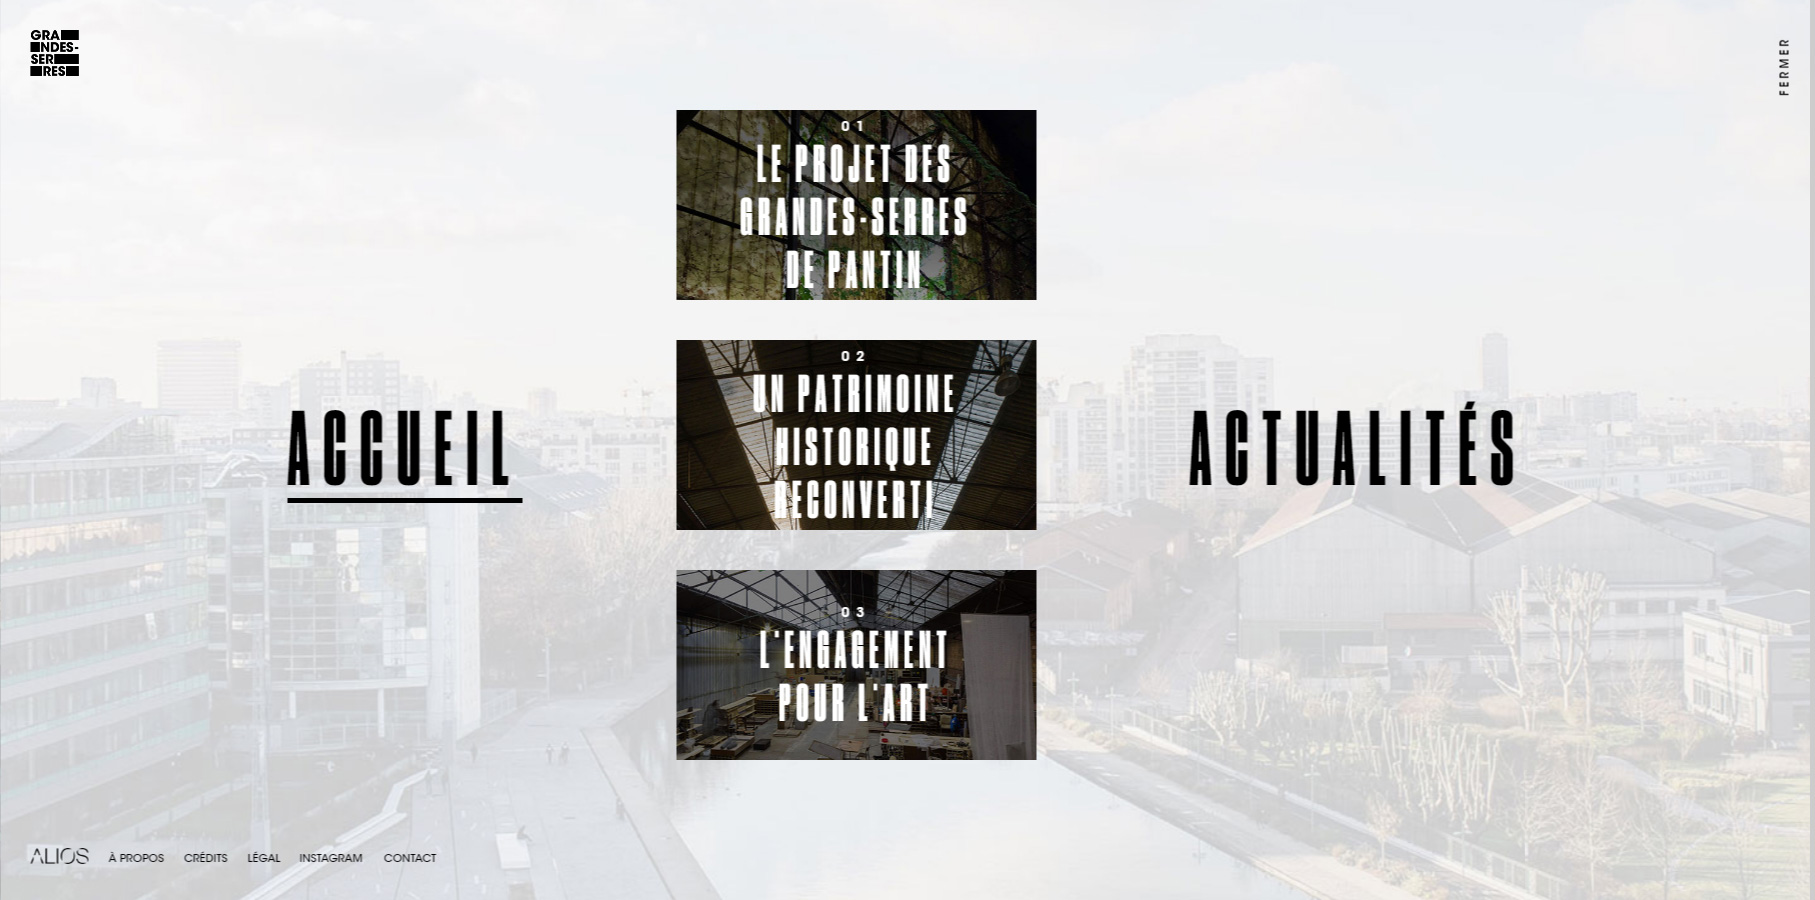 Les Grandes Serres - Website of the Day